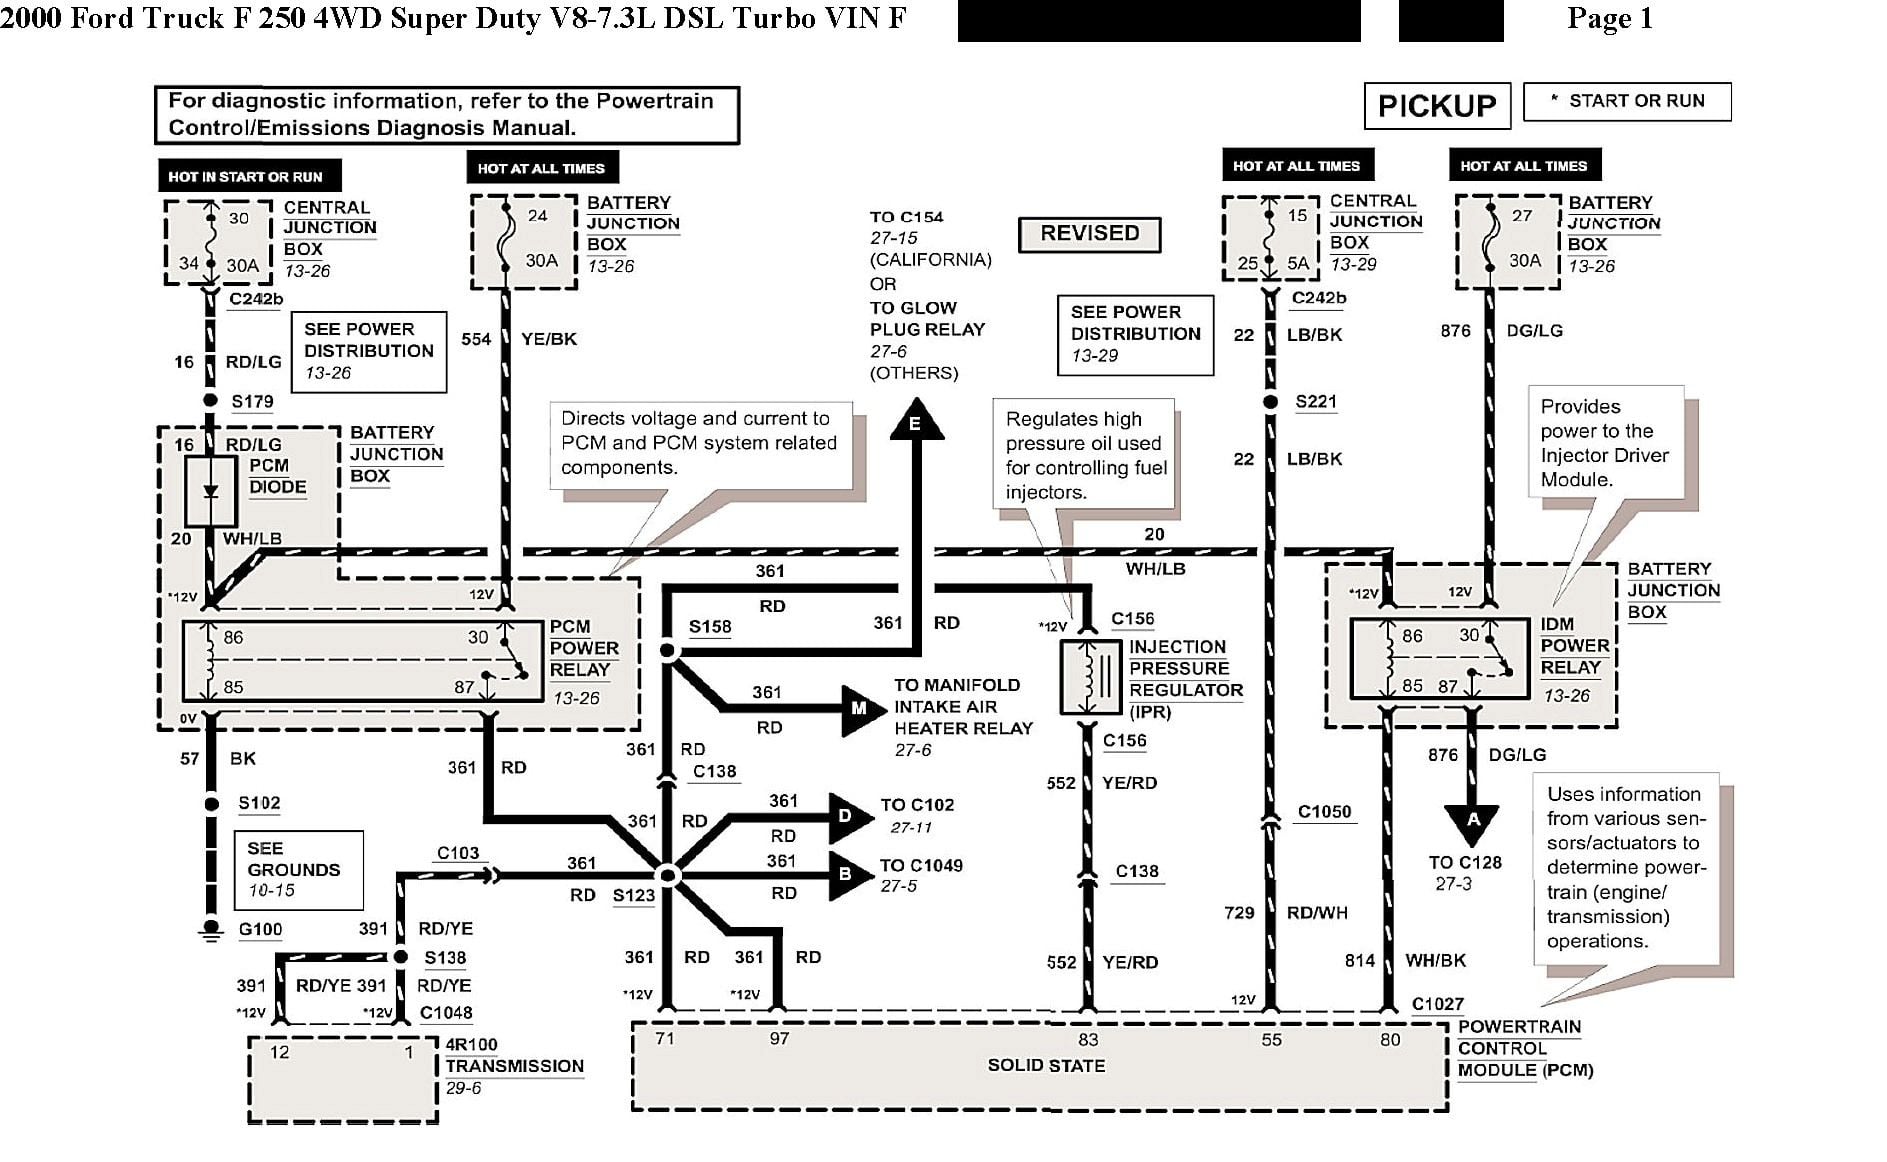 Need IPR wiring info-diagram, quickly please (2000) - Ford Truck  Enthusiasts Forums 2002 F150 Wiring Diagram PDF Ford Truck Enthusiasts